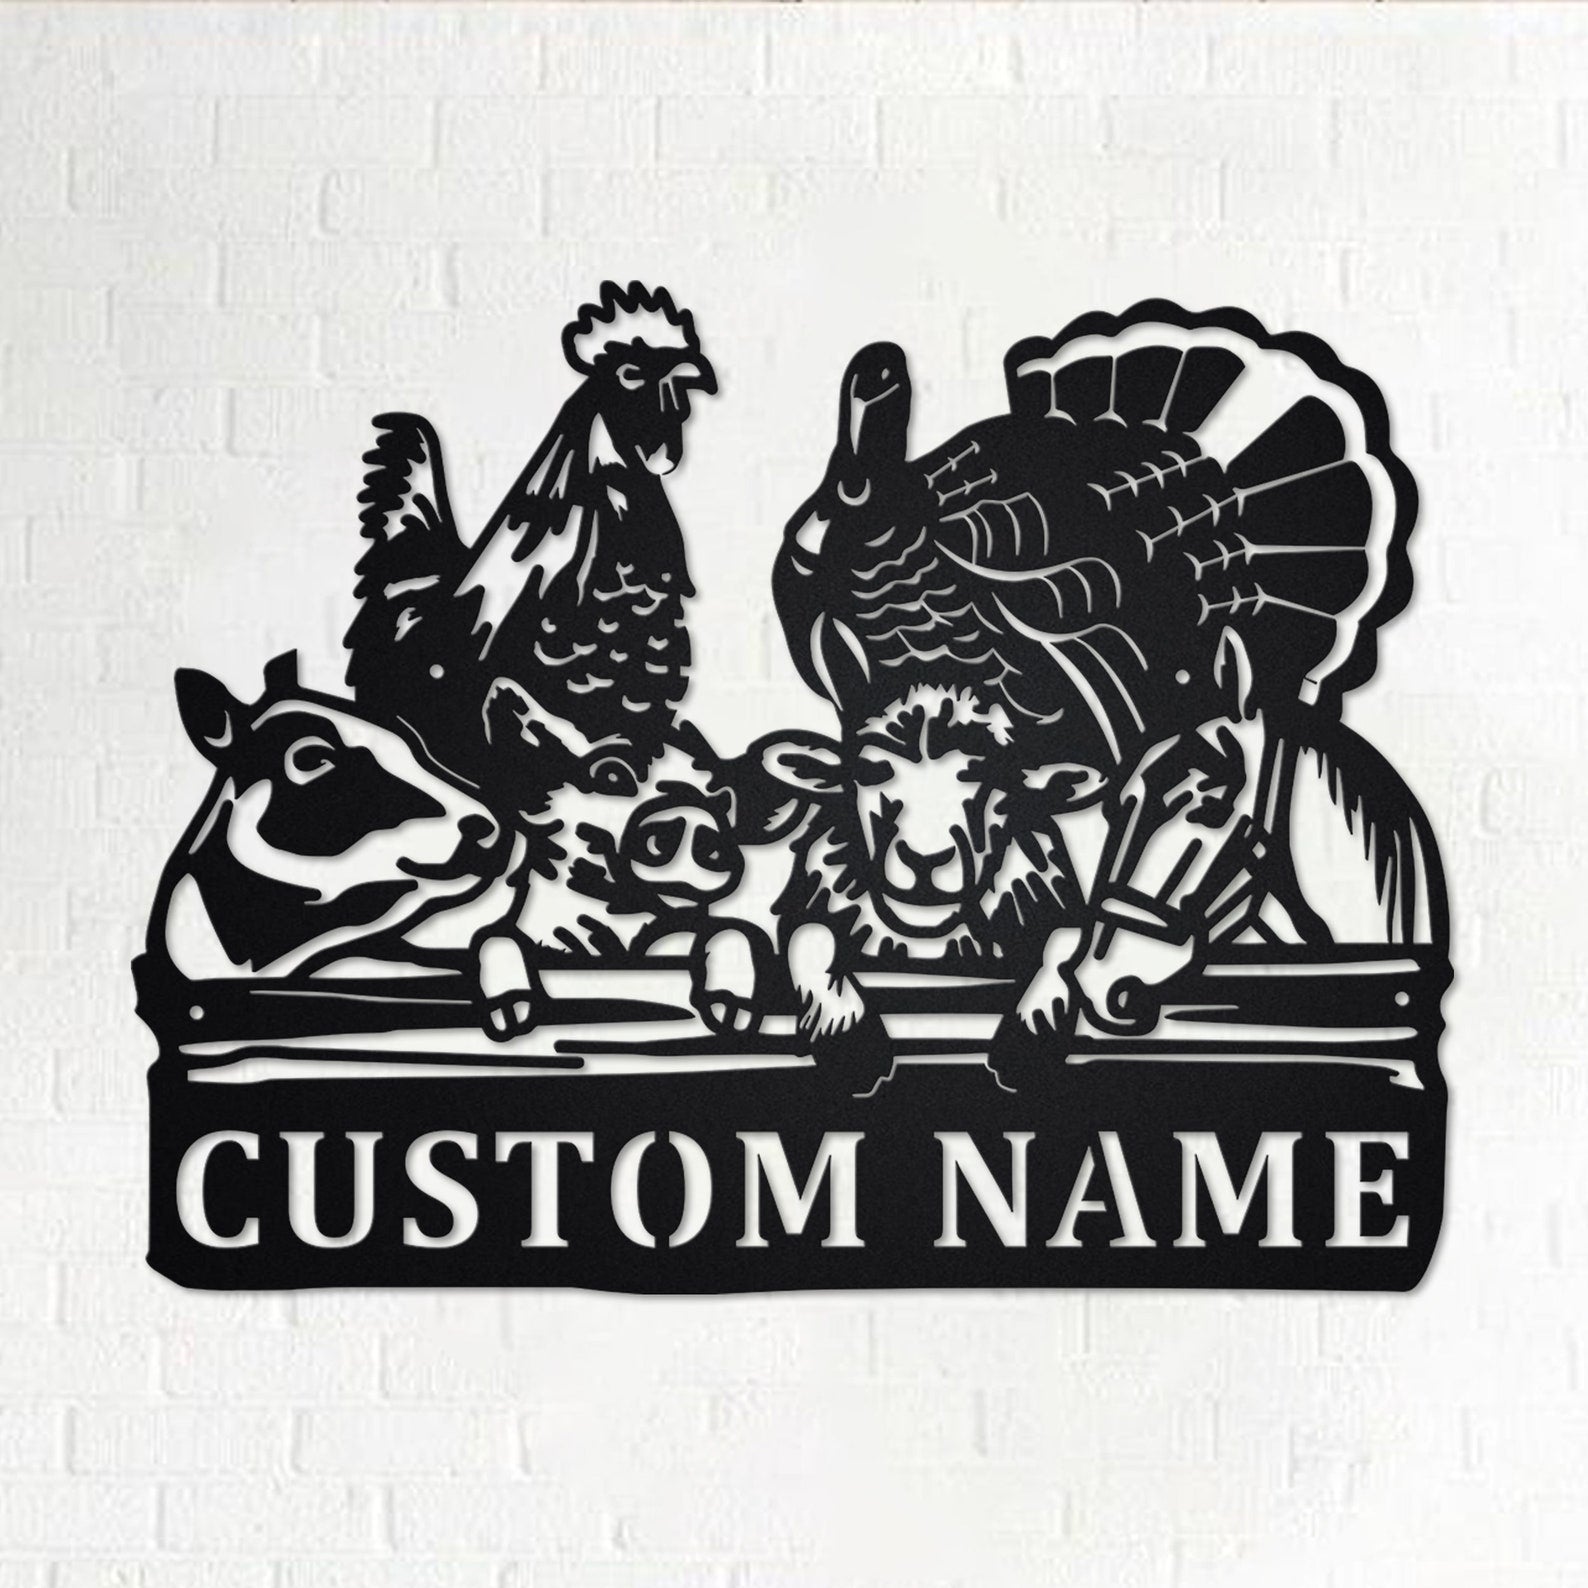 Custom Farm Animals Metal Wall Art, Personalized Farm Animals Name Sign Decoration For Room